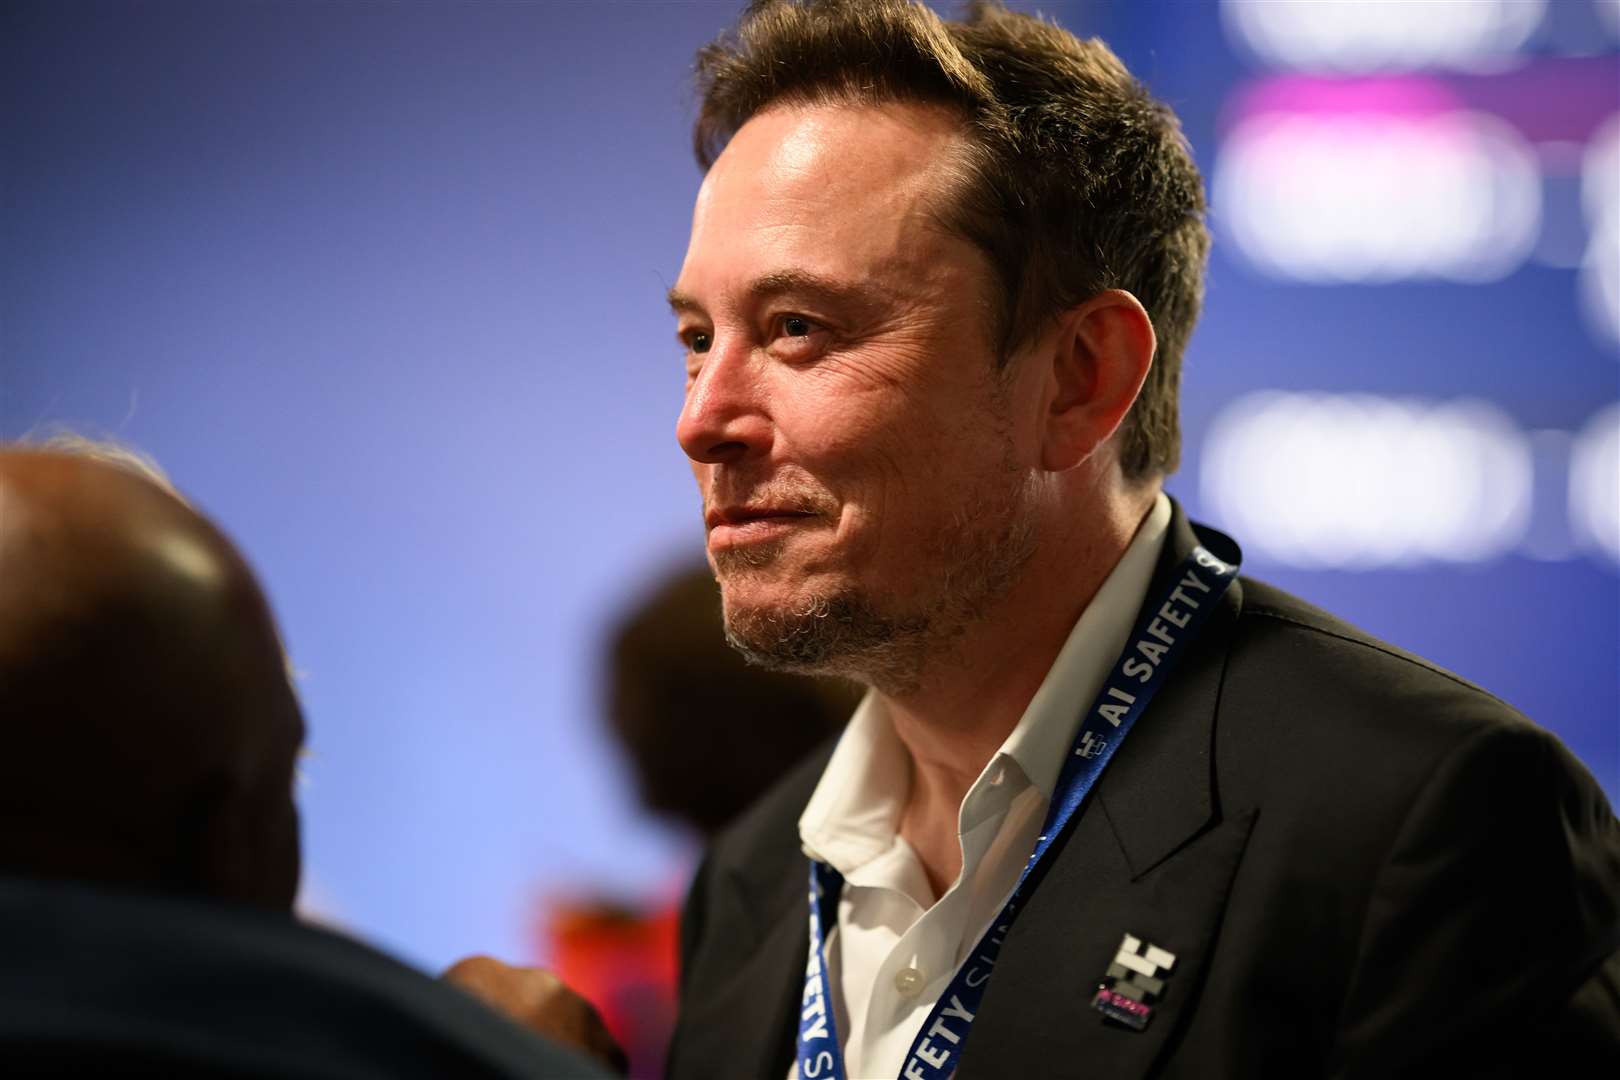 Elon Musk during the AI Safety Summit (Leon Neal/PA)